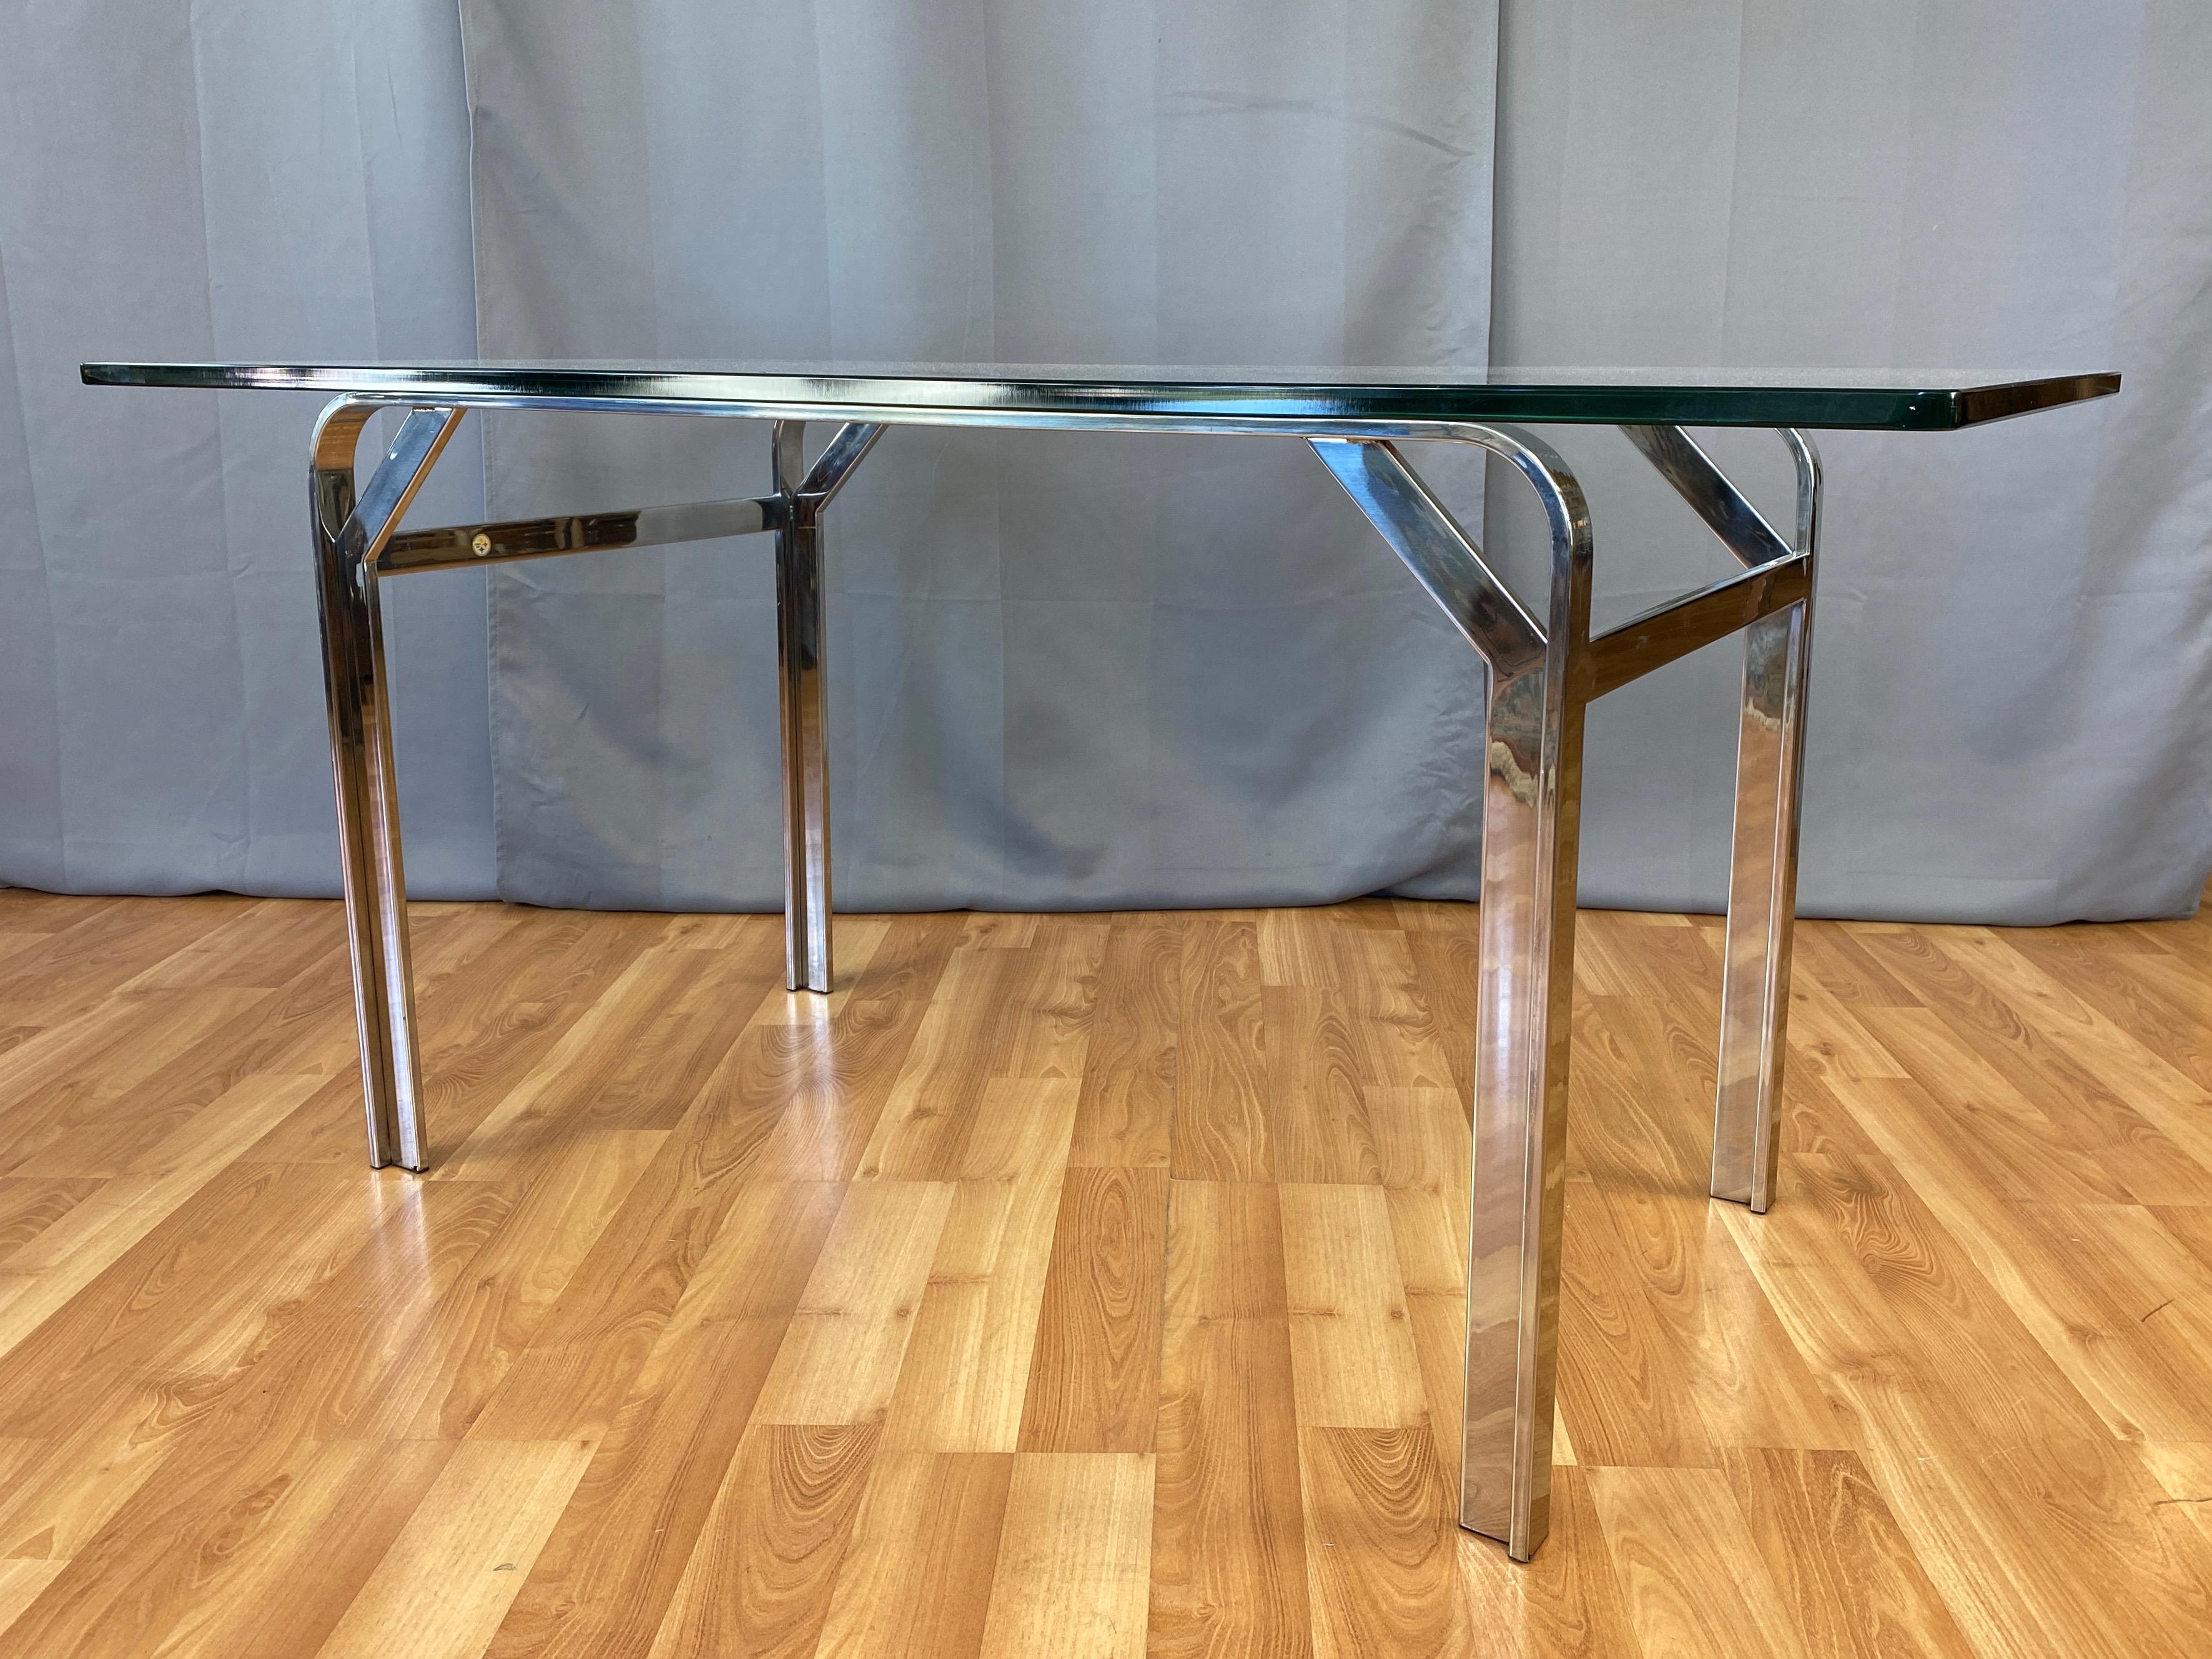 Mid-Century Modern Steelcase Polished Nickel-Plated Steel Desk or Table with Glass Top, 1970s